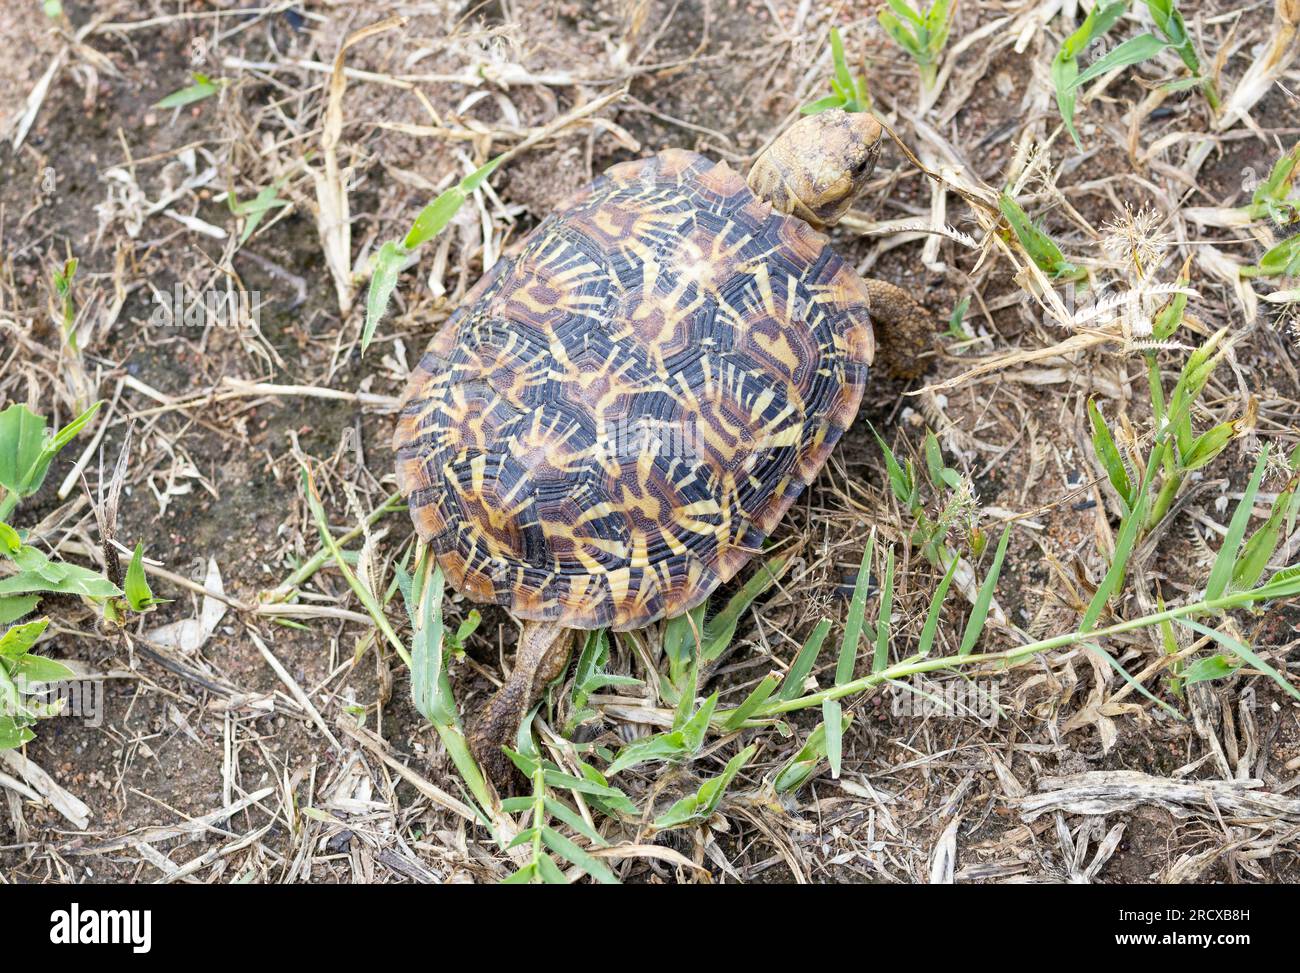 The Pancake Tortoise is a rare and endemic tortoise found only in areas of granite outcrops in East Africa. Stock Photo